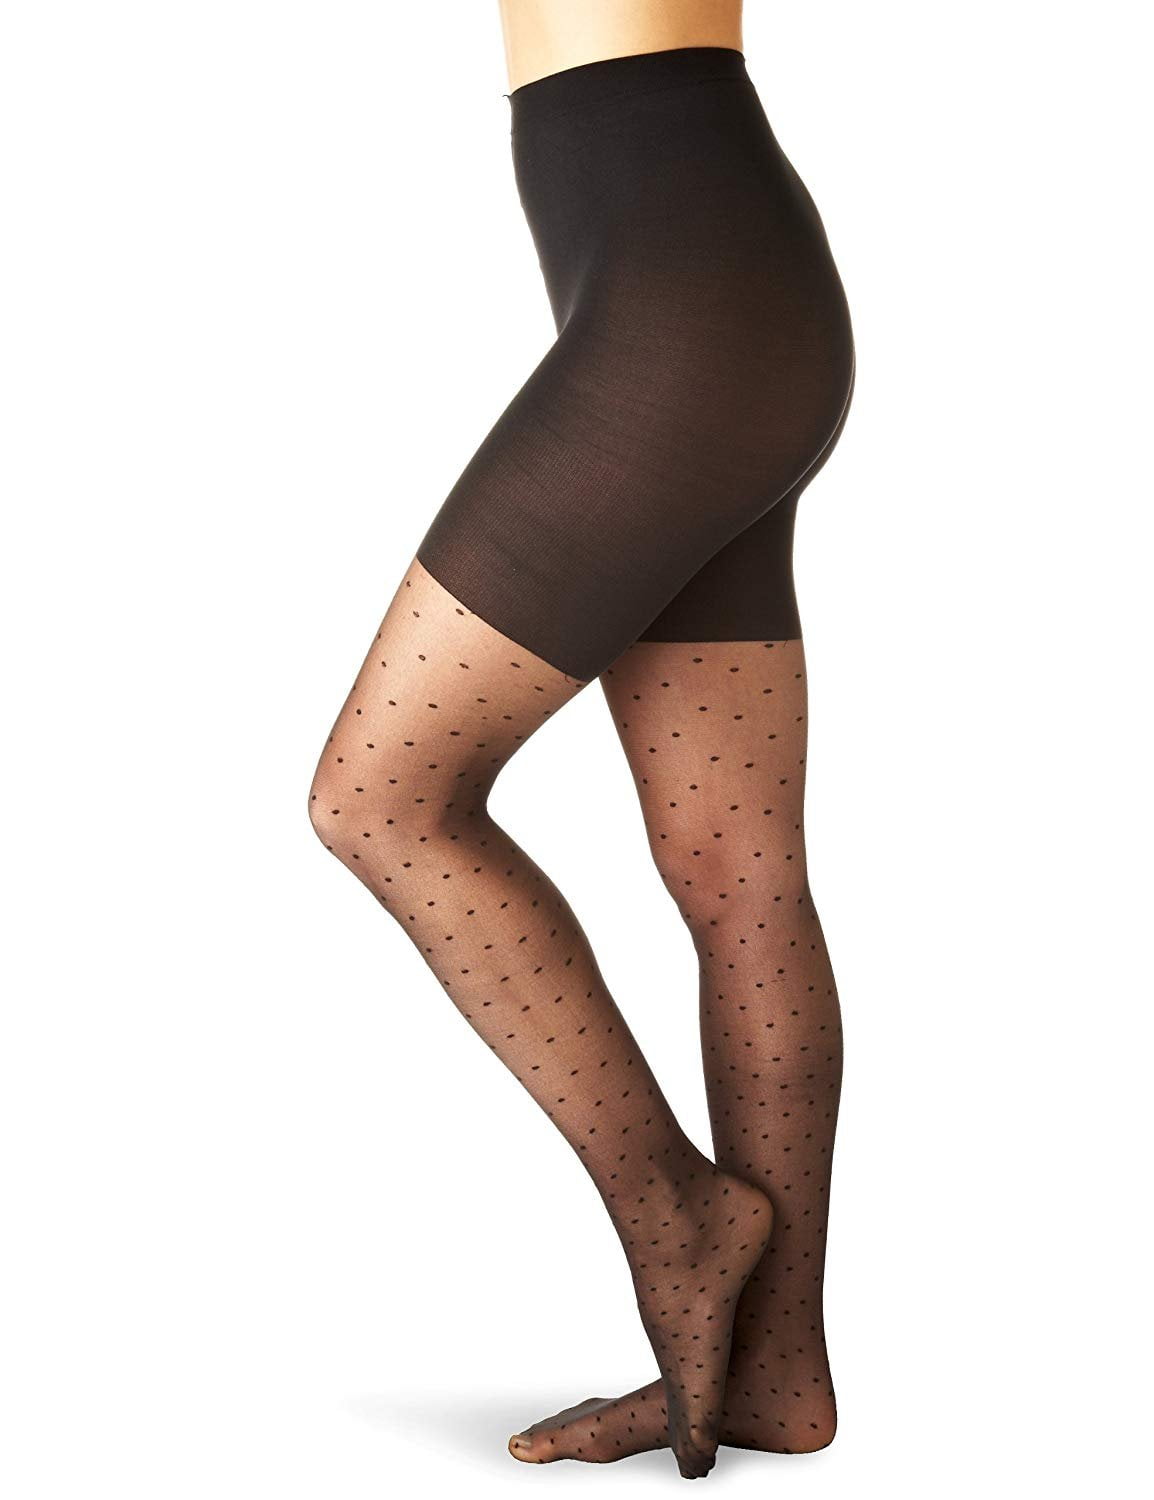 Assets By Sara Blakely Spanx 860b Women's Replacement Pack Ultra Sheer  Pantyhose (1, Cream) 